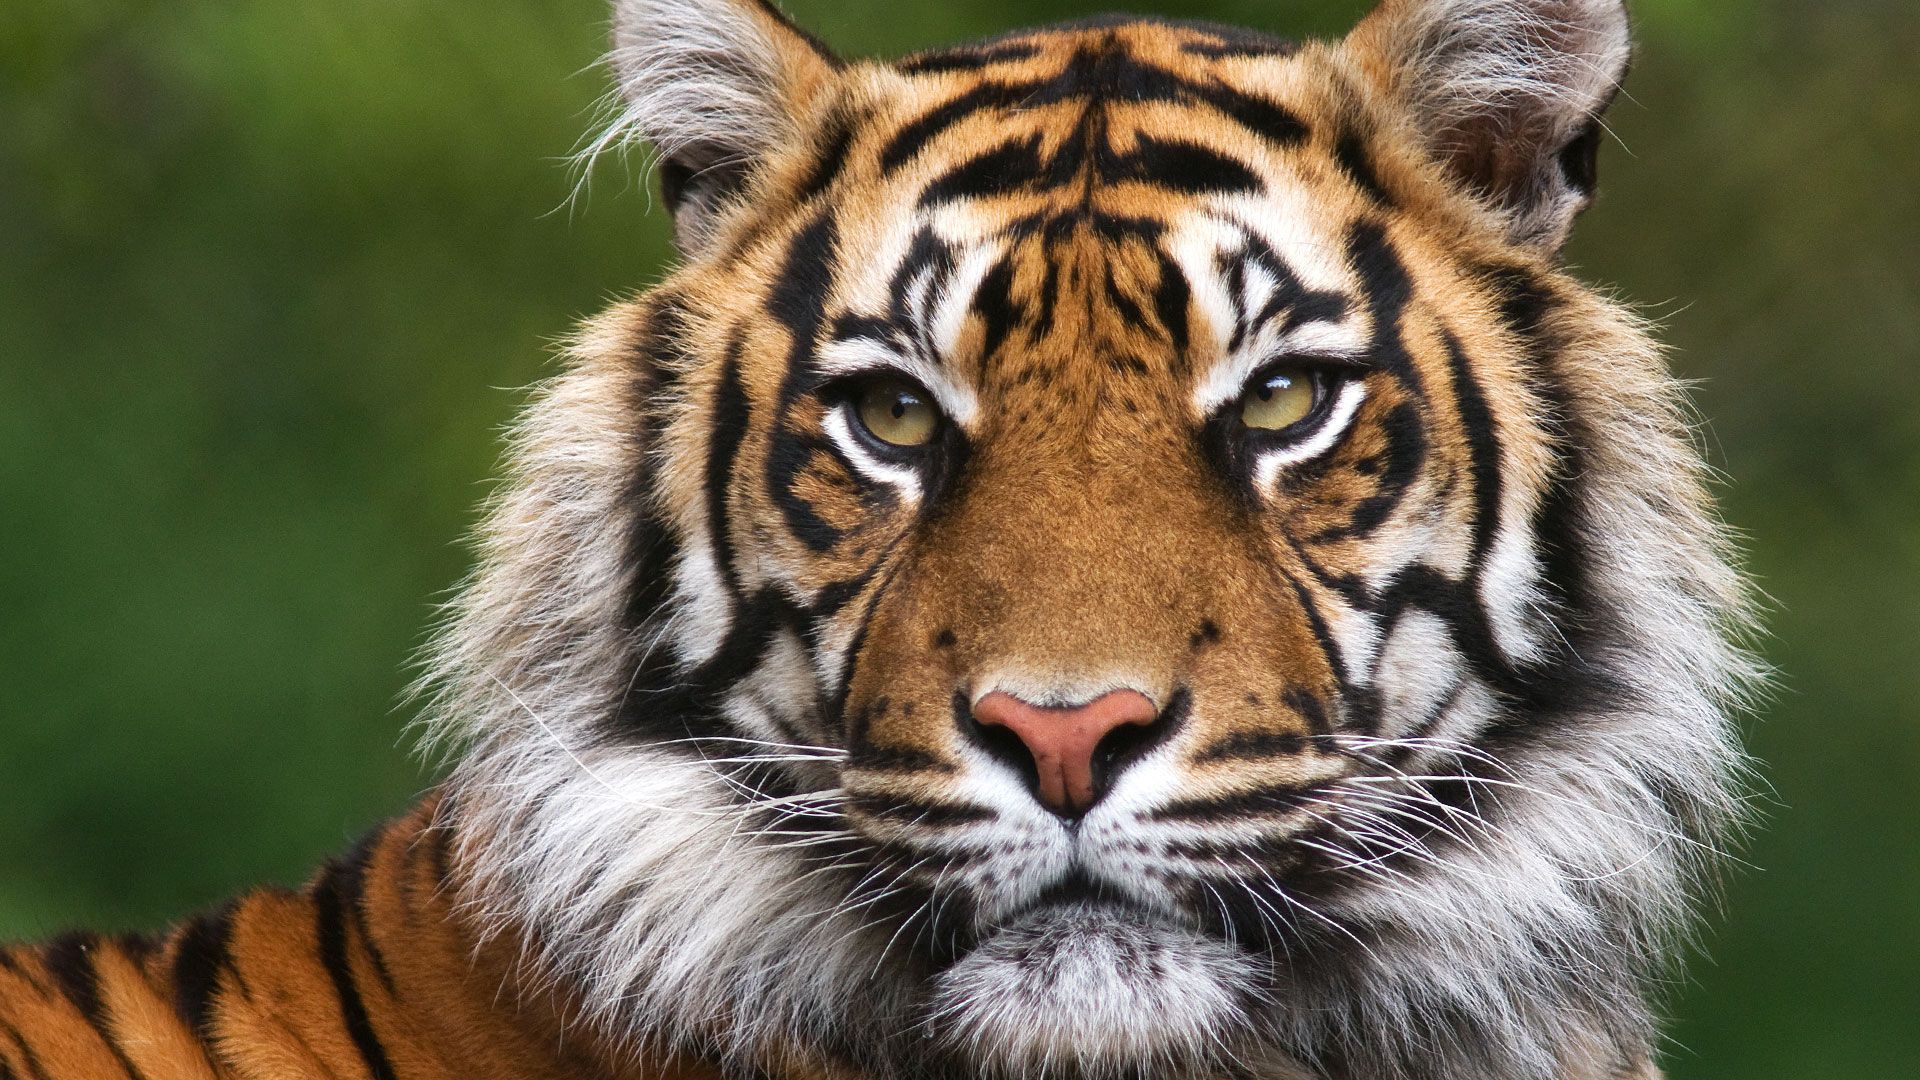 Tiger Full HD Wallpaper And Best Photo